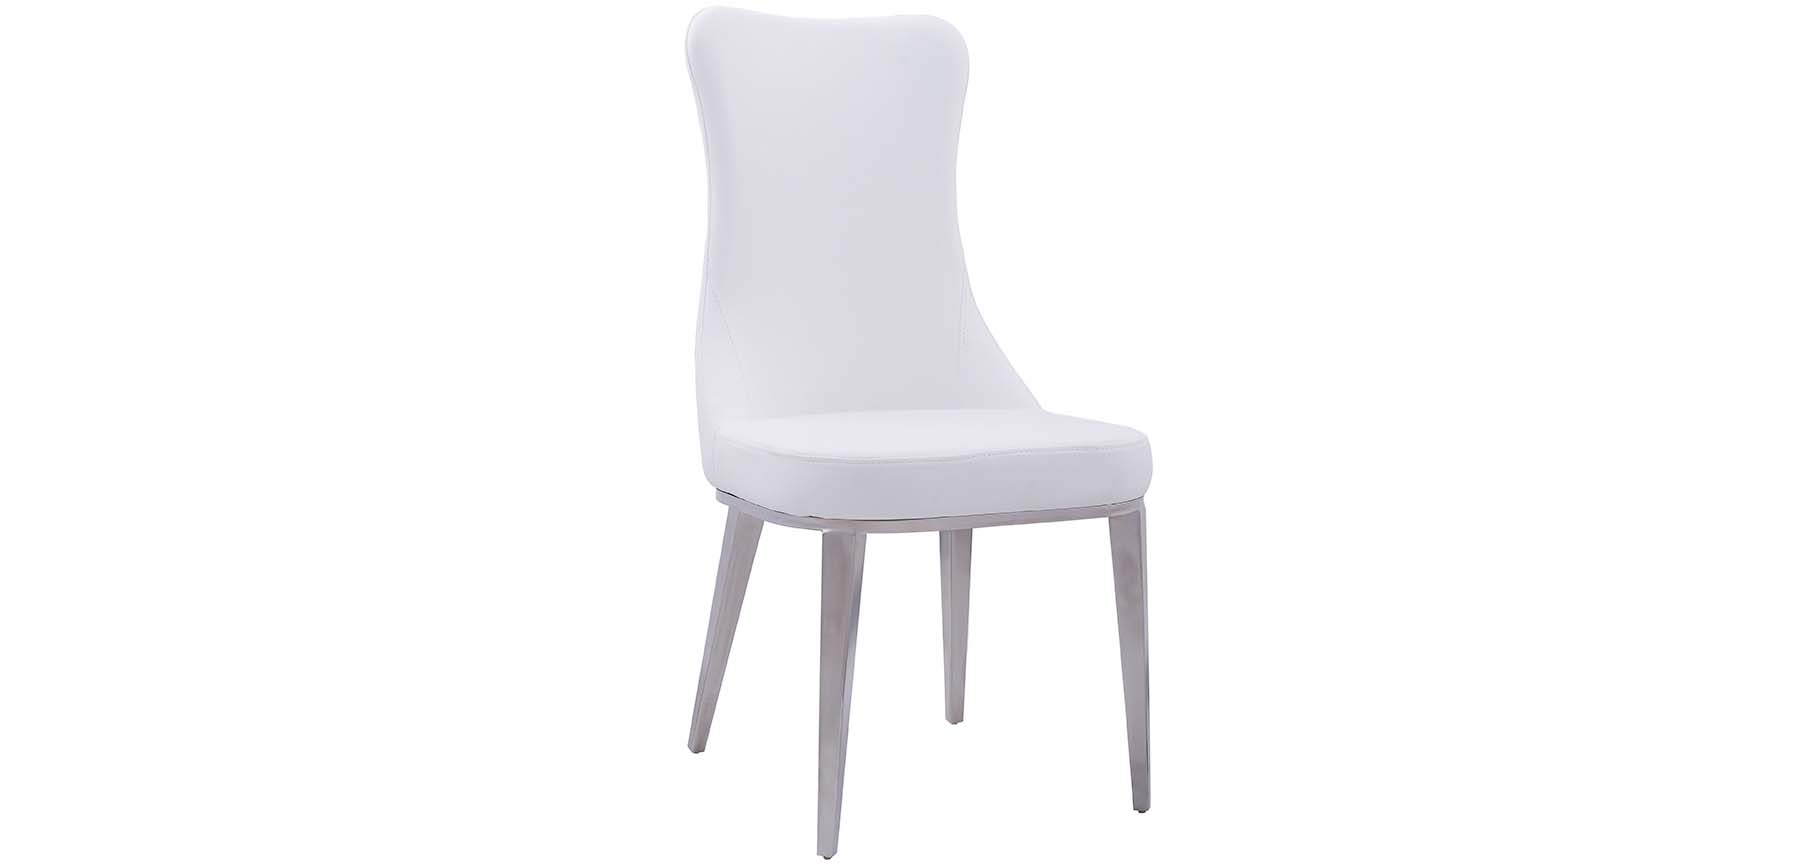 Clearance Dining Room 6138 Solid White (no pattern) Chair